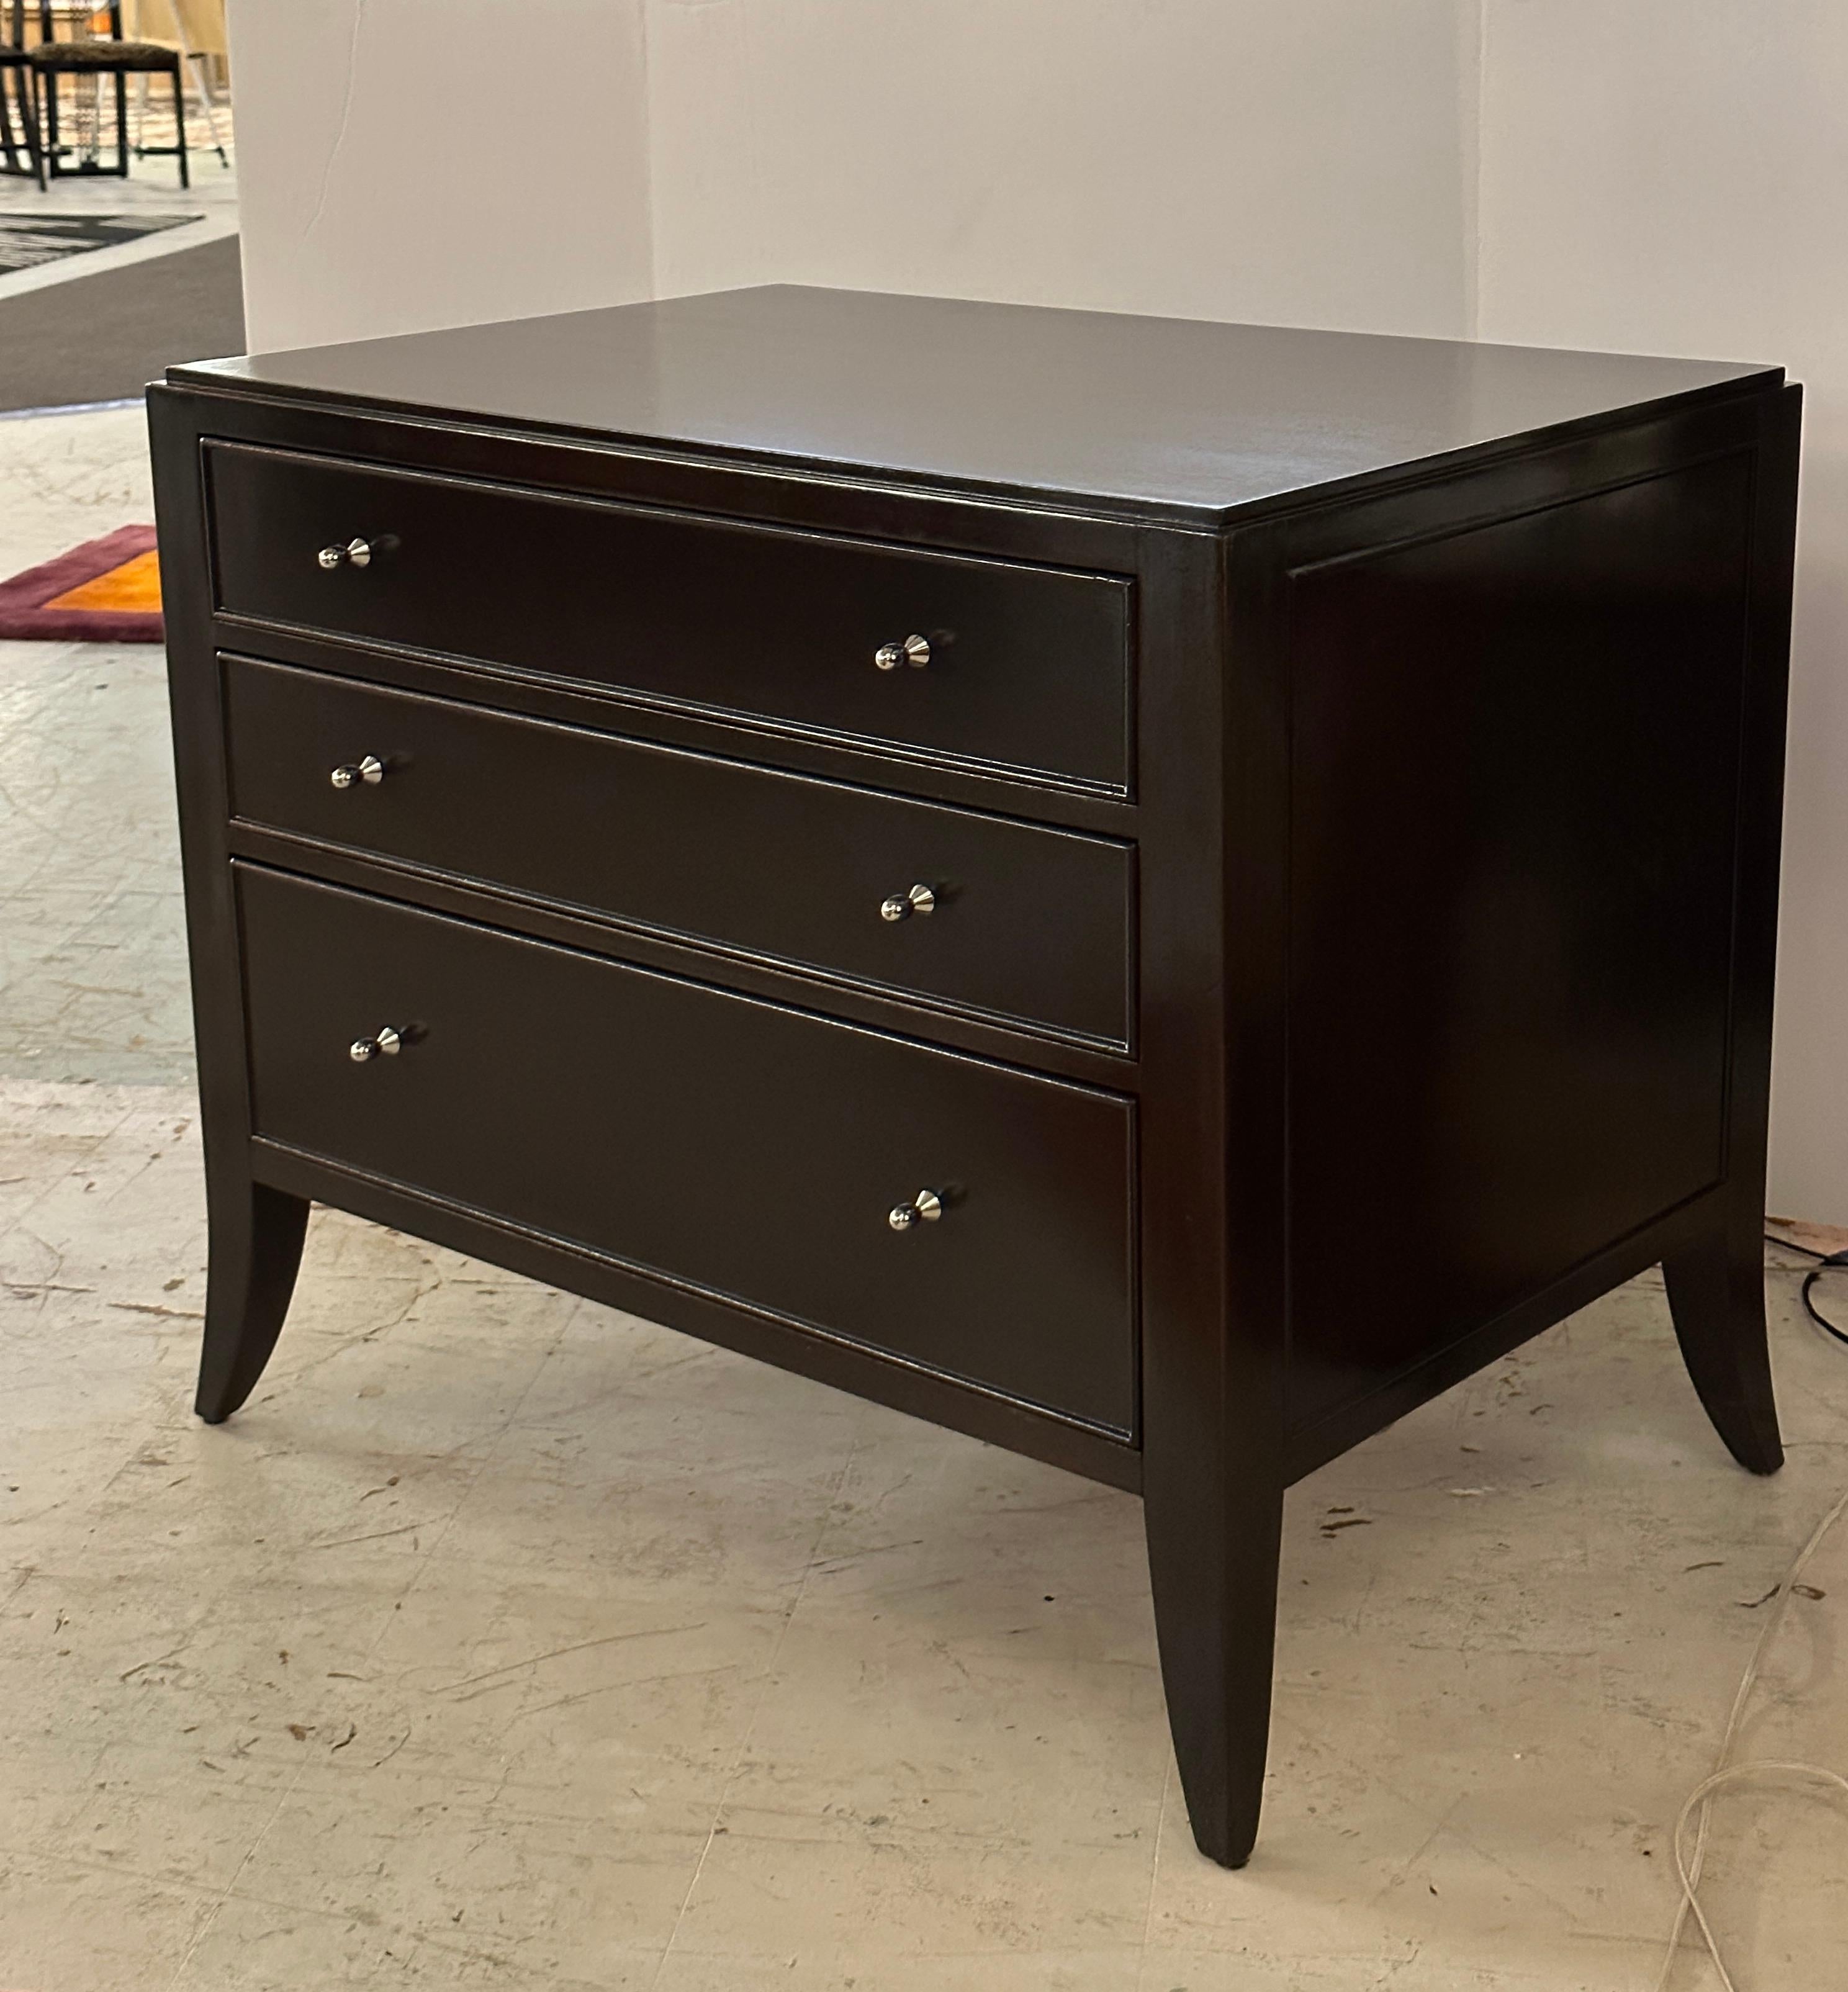 Mid-Century Modern Pair of Nightstands/ Chest of Drawers by Baker for the Barbara Barry Collection